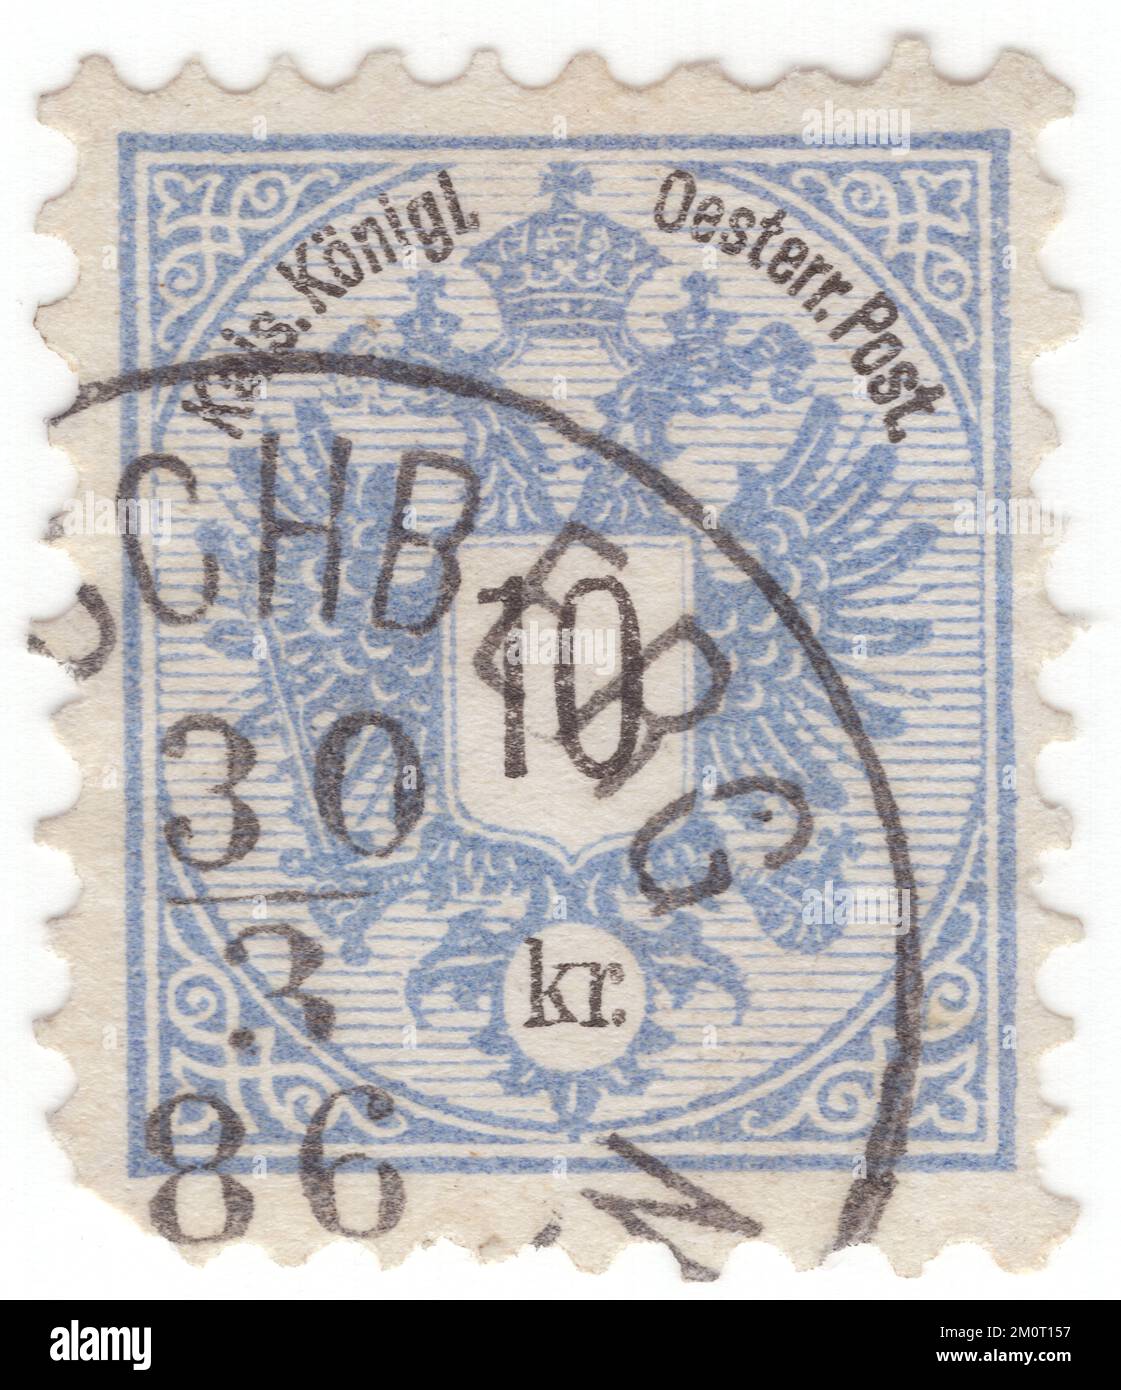 AUSTRIA — 1883: An 10 kreuzer blue postage stamp depicting Coat of Arms of the Austrian monarchy. The double-headed eagle of the ruling House of Habsburg-Lorraine was used by the common Imperial and Royal (k. u. k.) institutions of Austria-Hungary or the dual monarchy. double-headed eagle (or double-eagle) is a charge associated with the concept of Empire. Most modern uses of the symbol are directly or indirectly associated with its use by the late Byzantine Empire, originally a dynastic emblem of the Palaiologoi Stock Photo